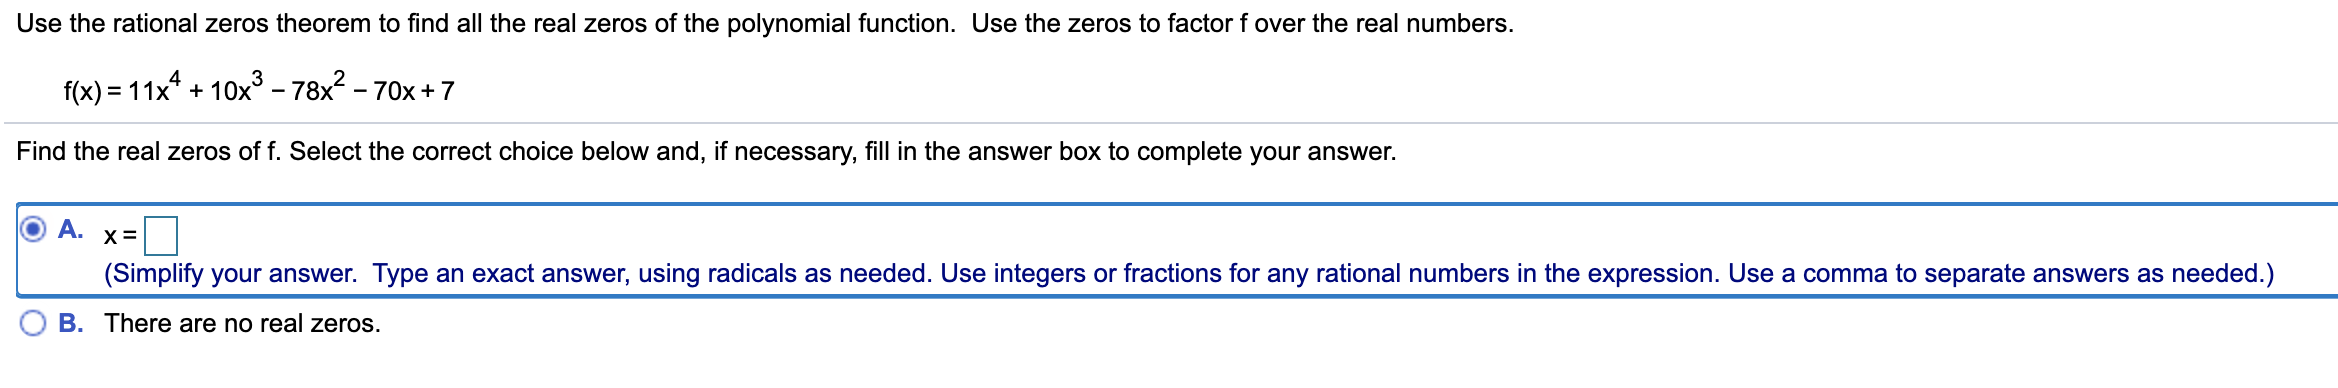 Use the rational zeros theorem to find all the real zeros of the polynomial function. Use the zeros to factor f over the real numbers.
f(x) = 11x* + 10x³ - 78x? - 70x + 7
%3D
Find the real zeros of f. Select the correct choice below and, if necessary, fill in the answer box to complete your answer.
A.
(Simplify your answer. Type an exact answer, using radicals as needed. Use integers or fractions for any rational numbers in the expression. Use a comma to separate answers as needed.)
B. There are no real zeros.
